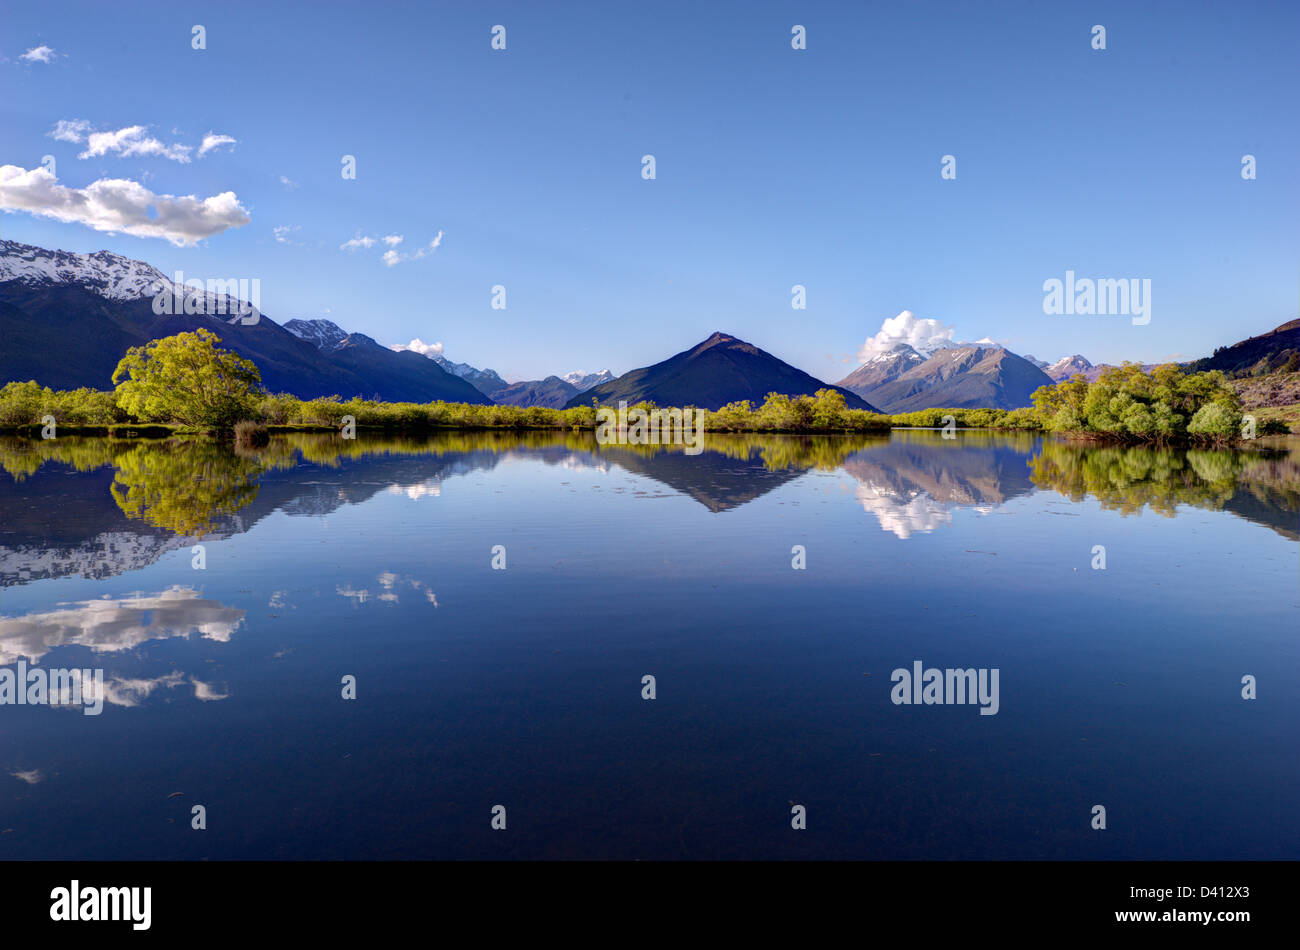 Reflection of the mountains on the lagoon at Glenorchy, New Zealand. Stock Photo